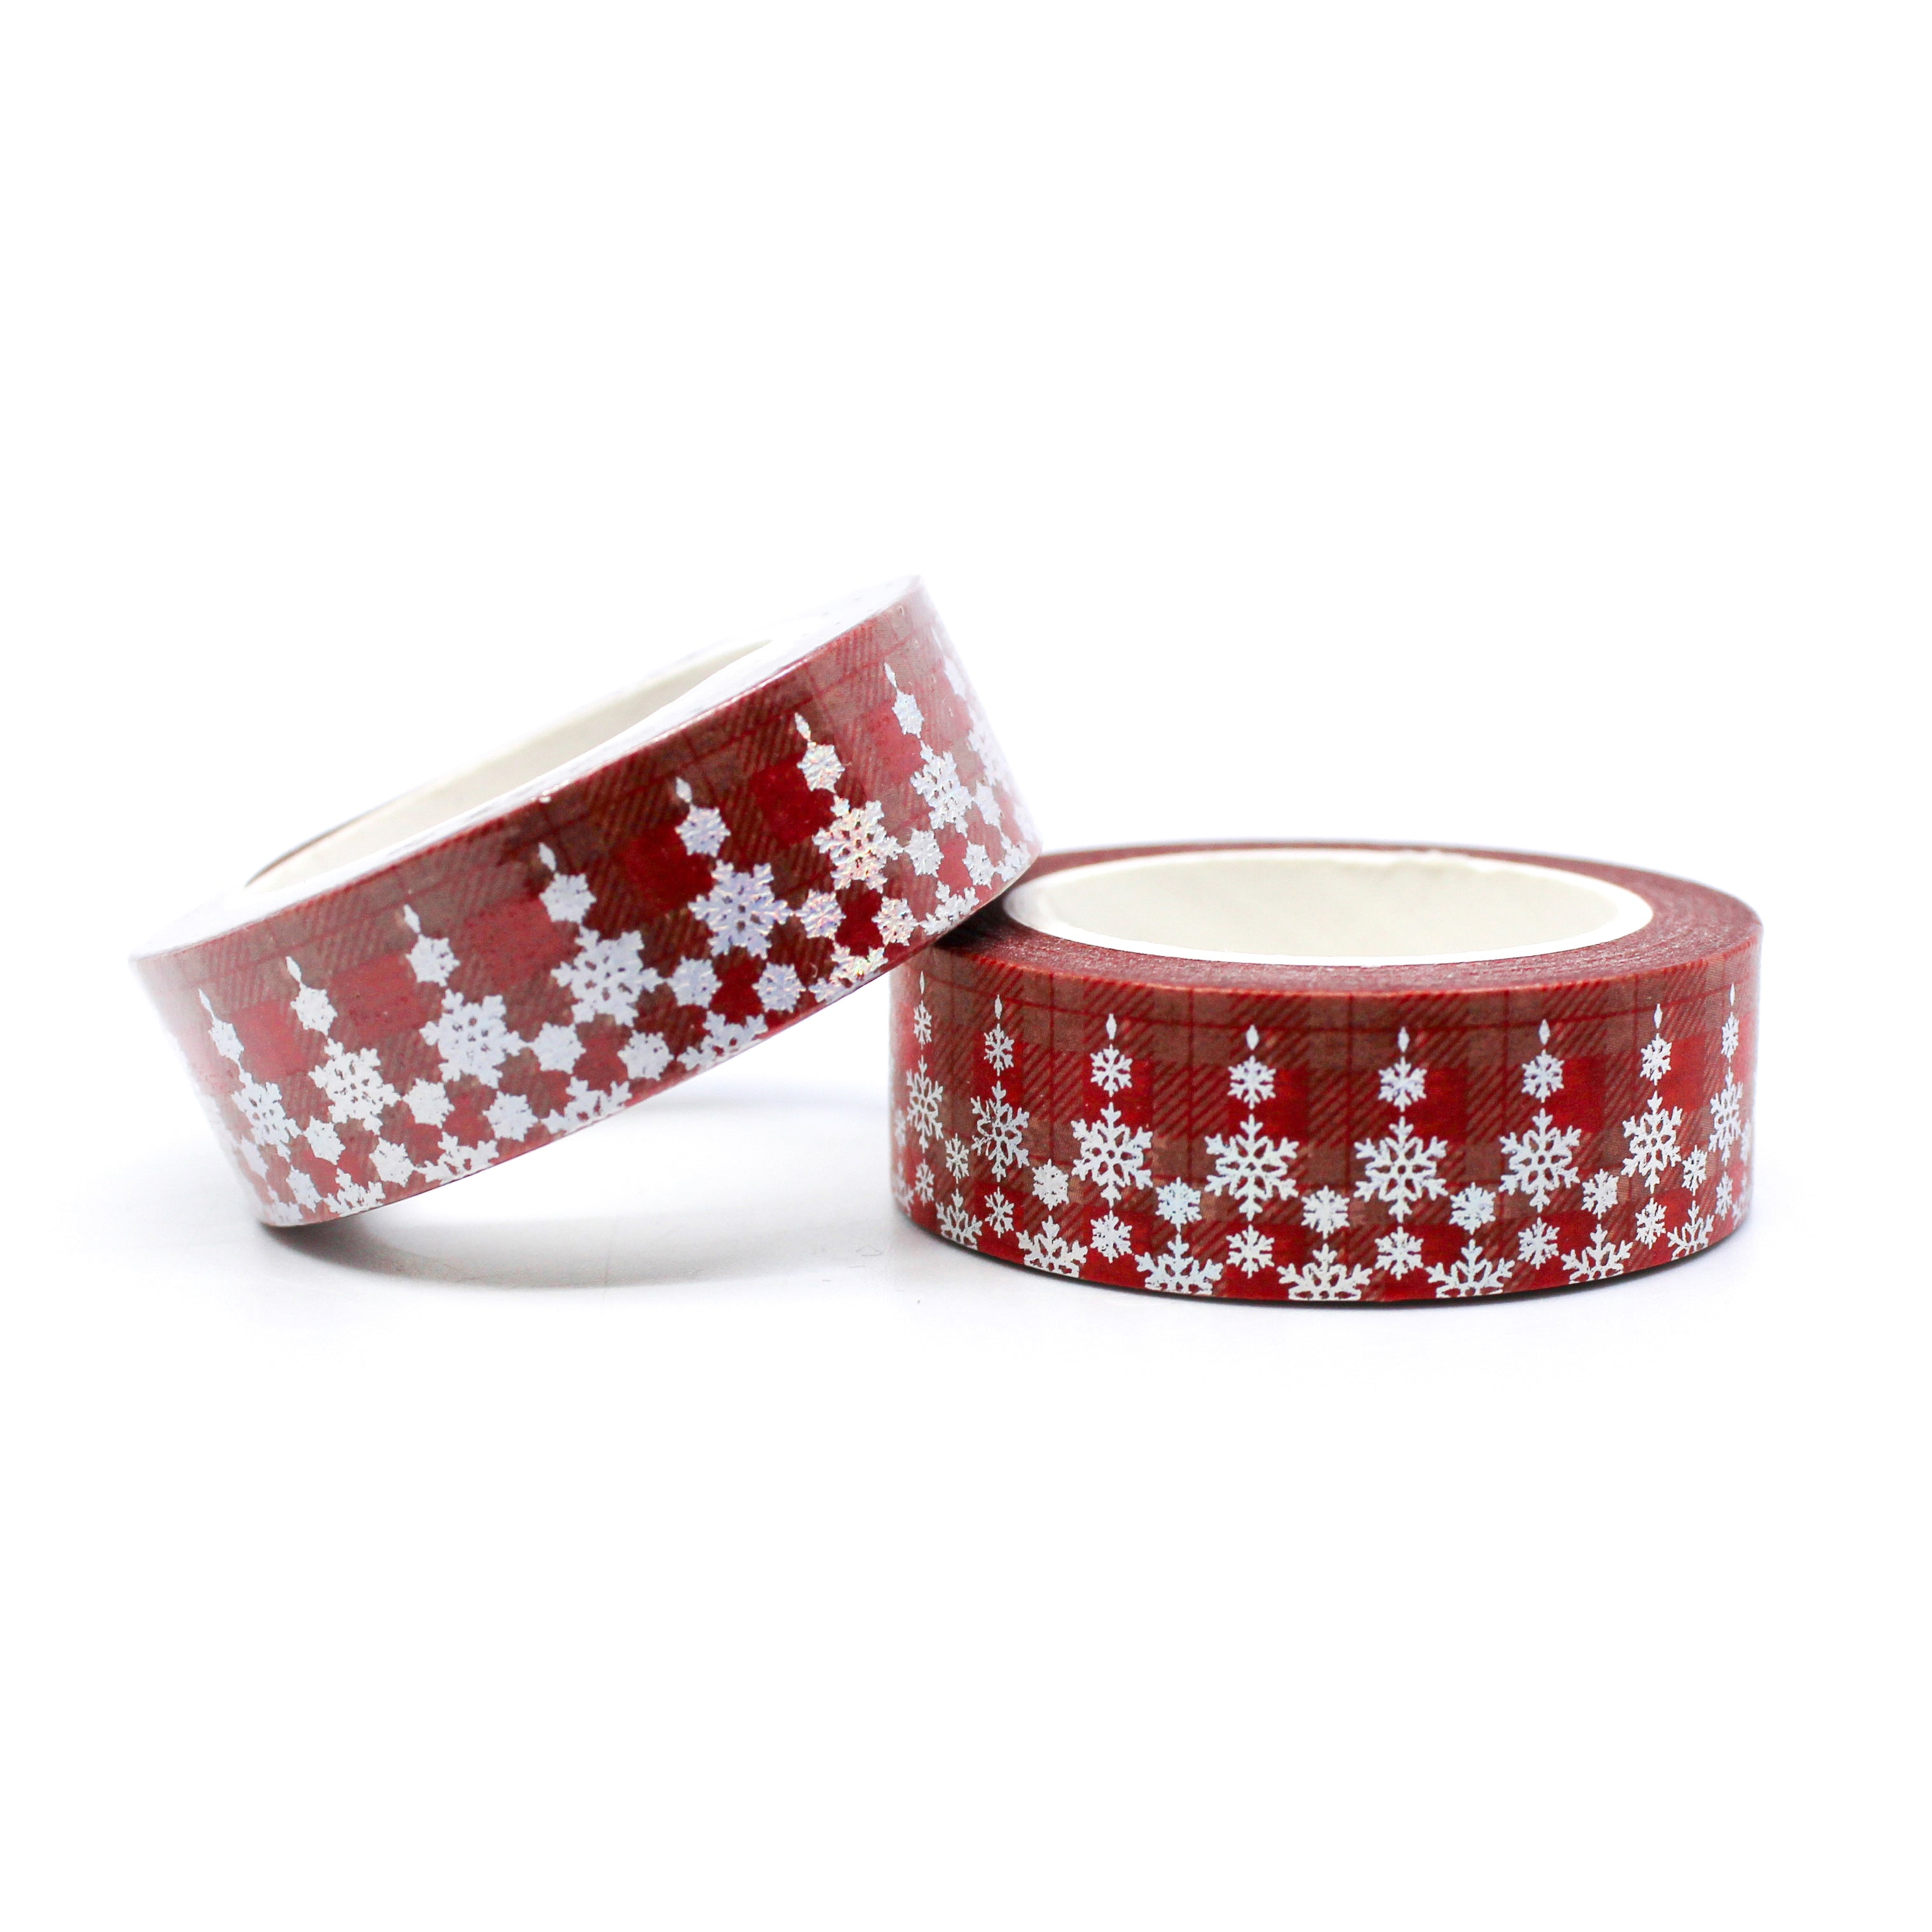 This is a beautiful silver foil snowflake pattern washi tapes on a traditional Holiday red plaid  Background from BBB Supplies Craft Shop